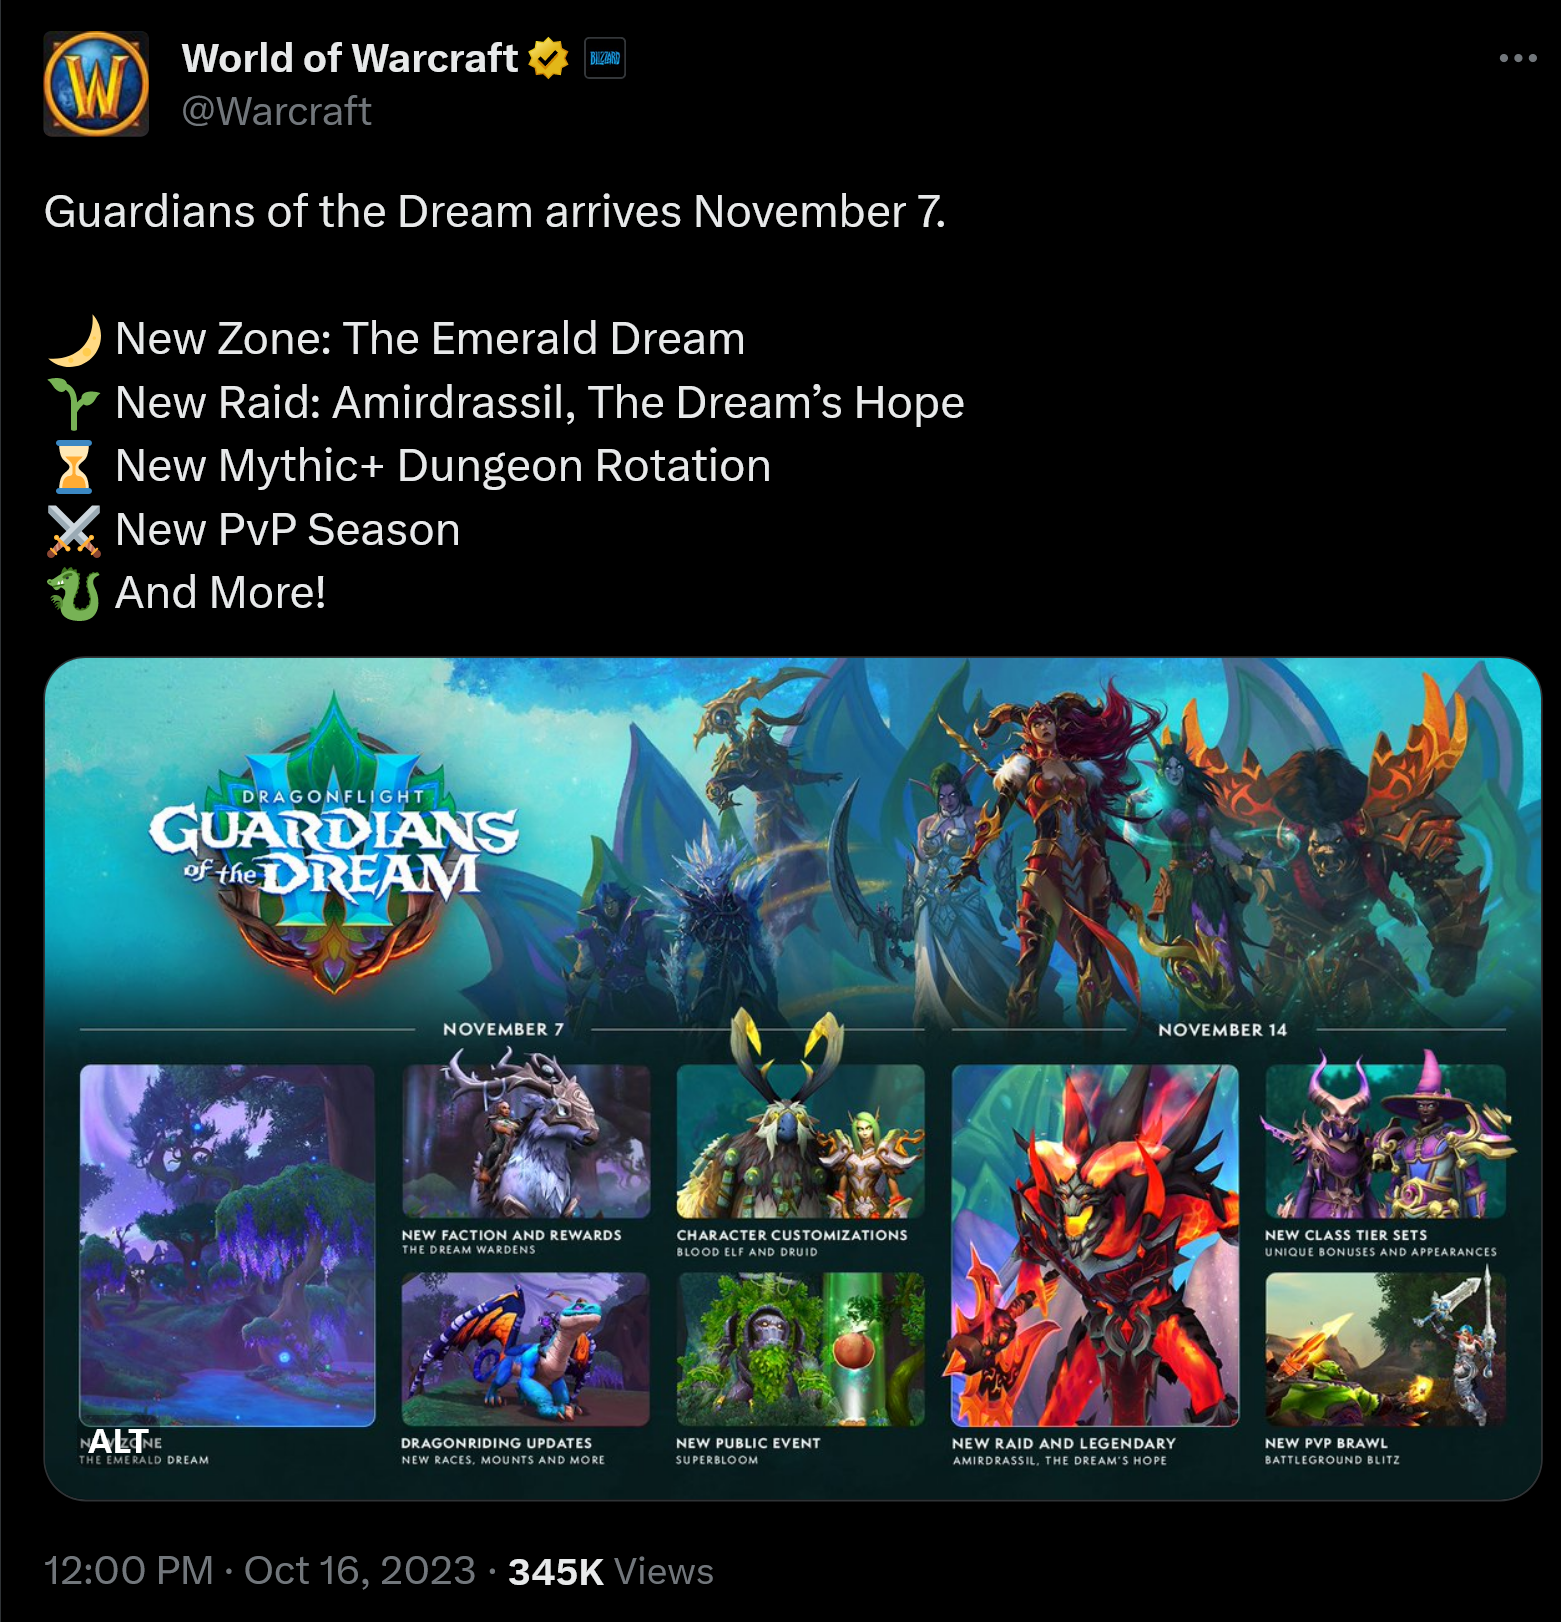 Guardians of the Dream arrives November 7.  ???? New Zone: The Emerald Dream ???? New Raid: Amirdrassil, The Dream’s Hope ⌛ New Mythic+ Dungeon Rotation ⚔️ New PvP Season ???? And More!